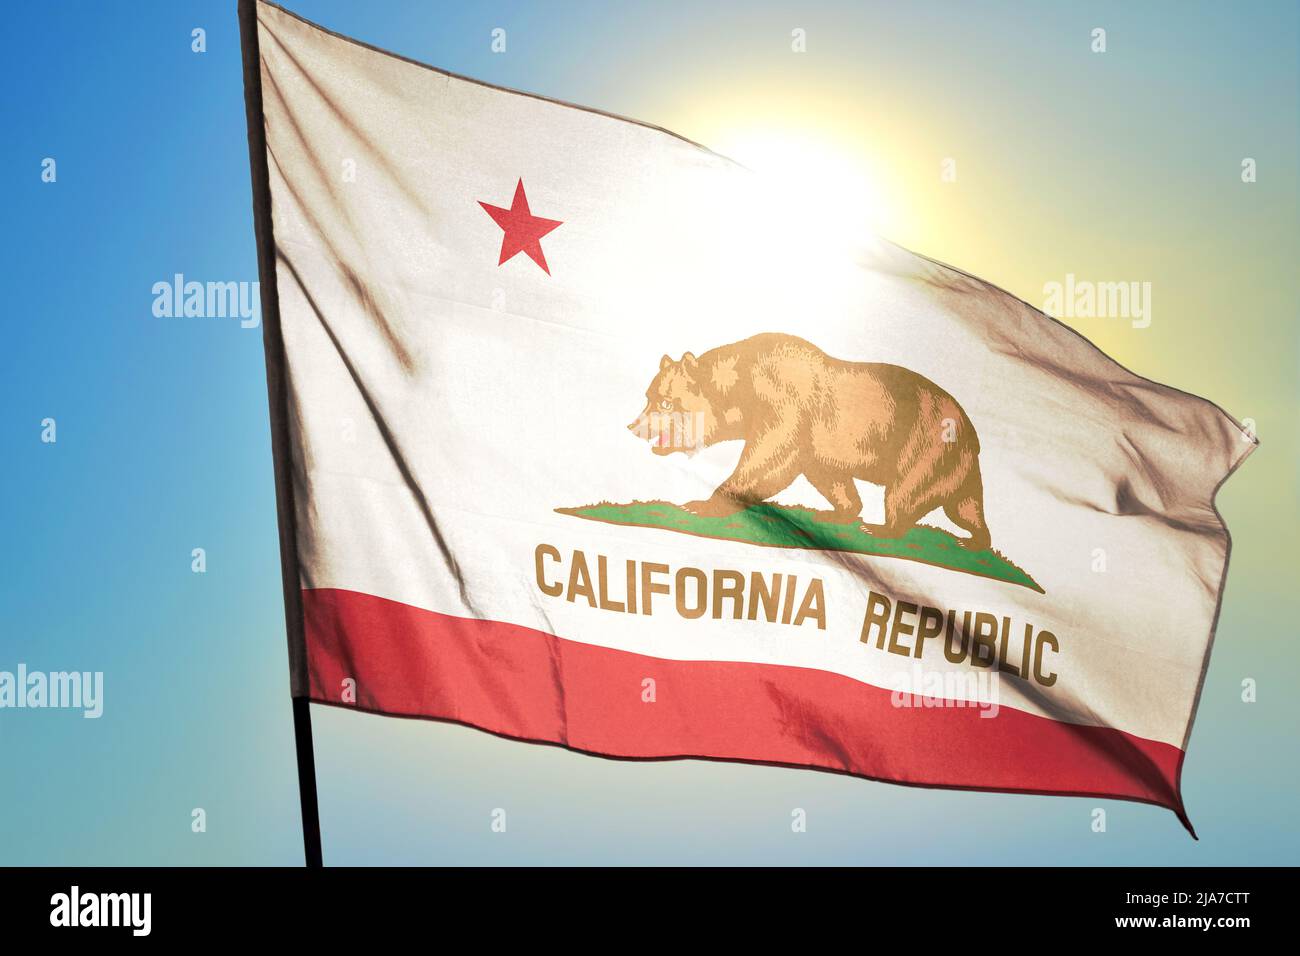 California state of United States flag waving on the wind Stock Photo